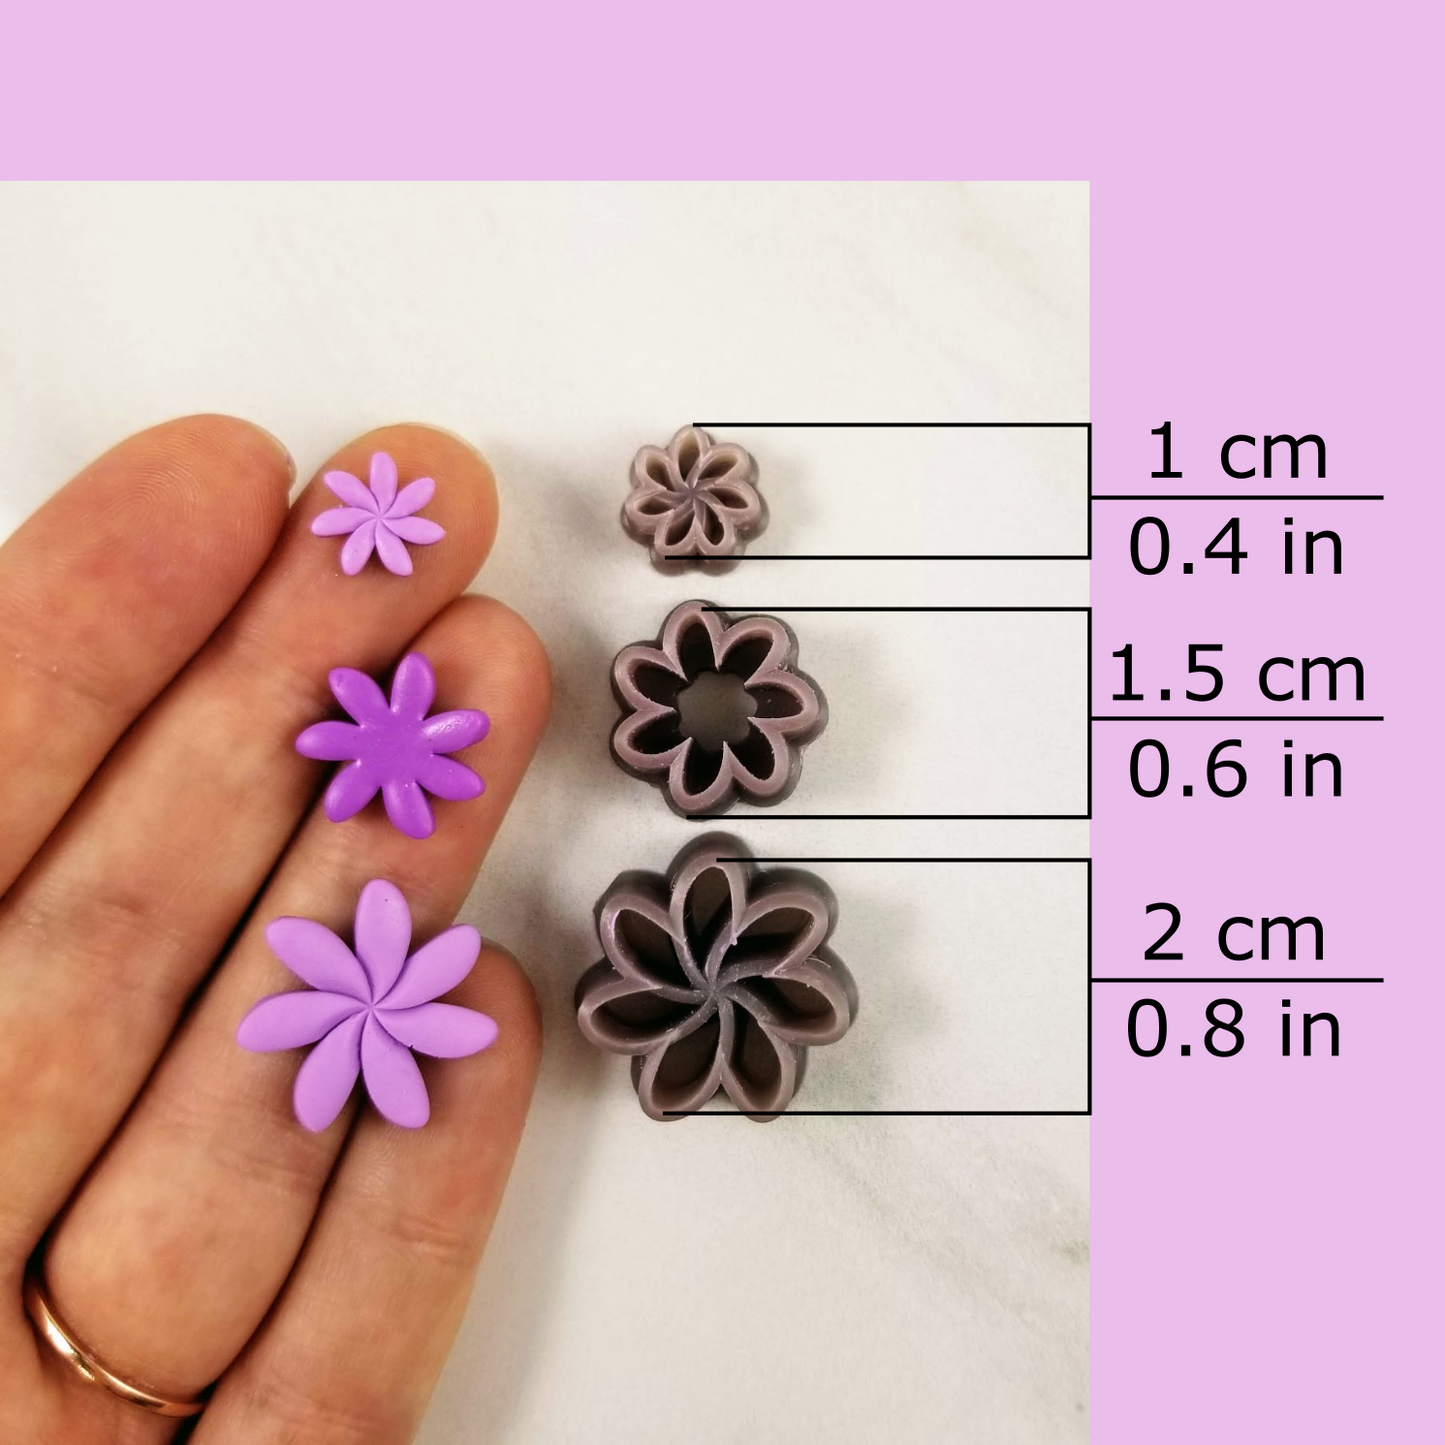 Tiare flower polymer clay cutter available sizes, 1 centimeter / 0.2 inches, 1.5 centimeters / 0.4 inches, 2 centimeters / 0.6 inches